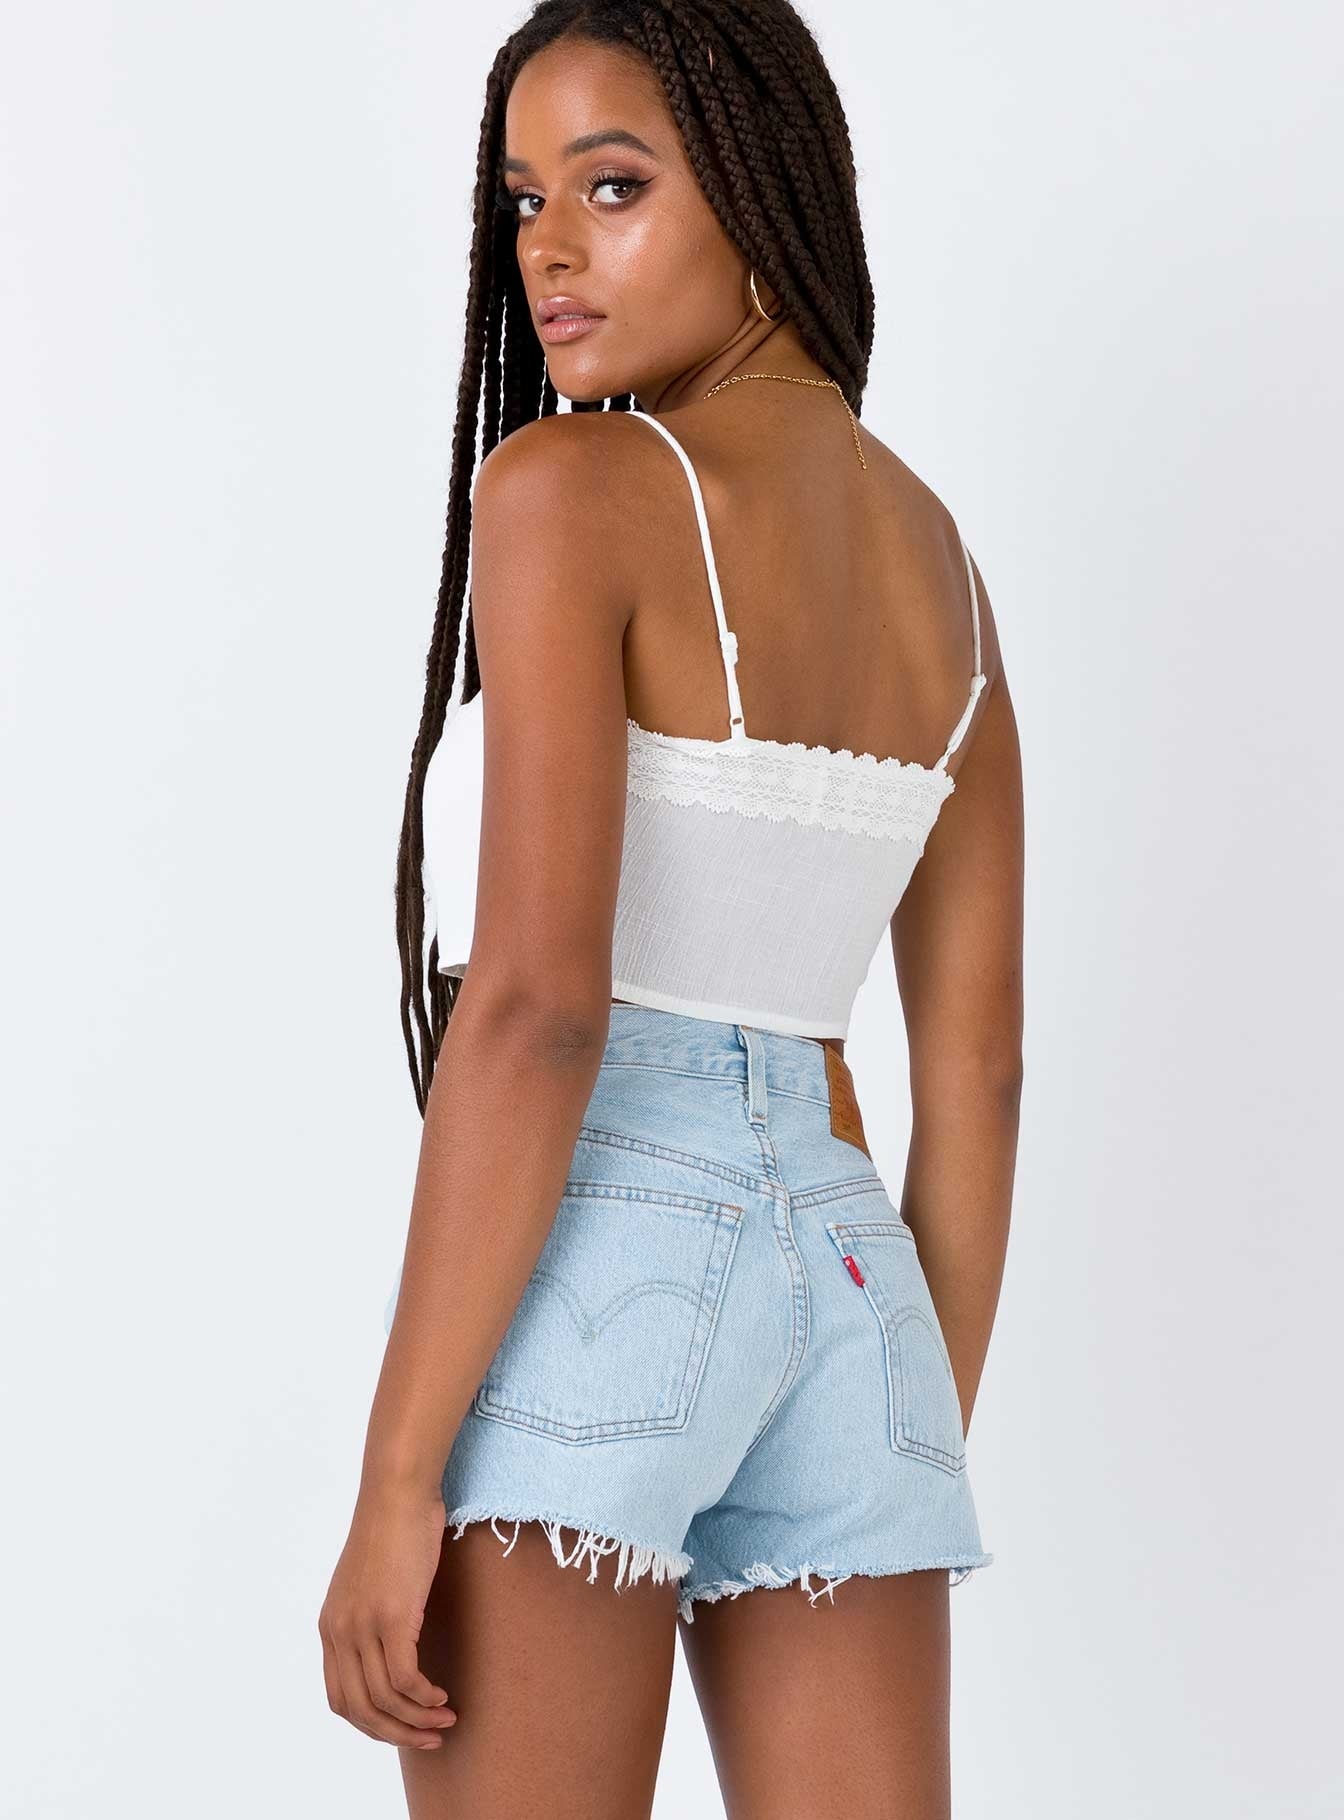 Levis Weak In The Knees 501 High Rise Short